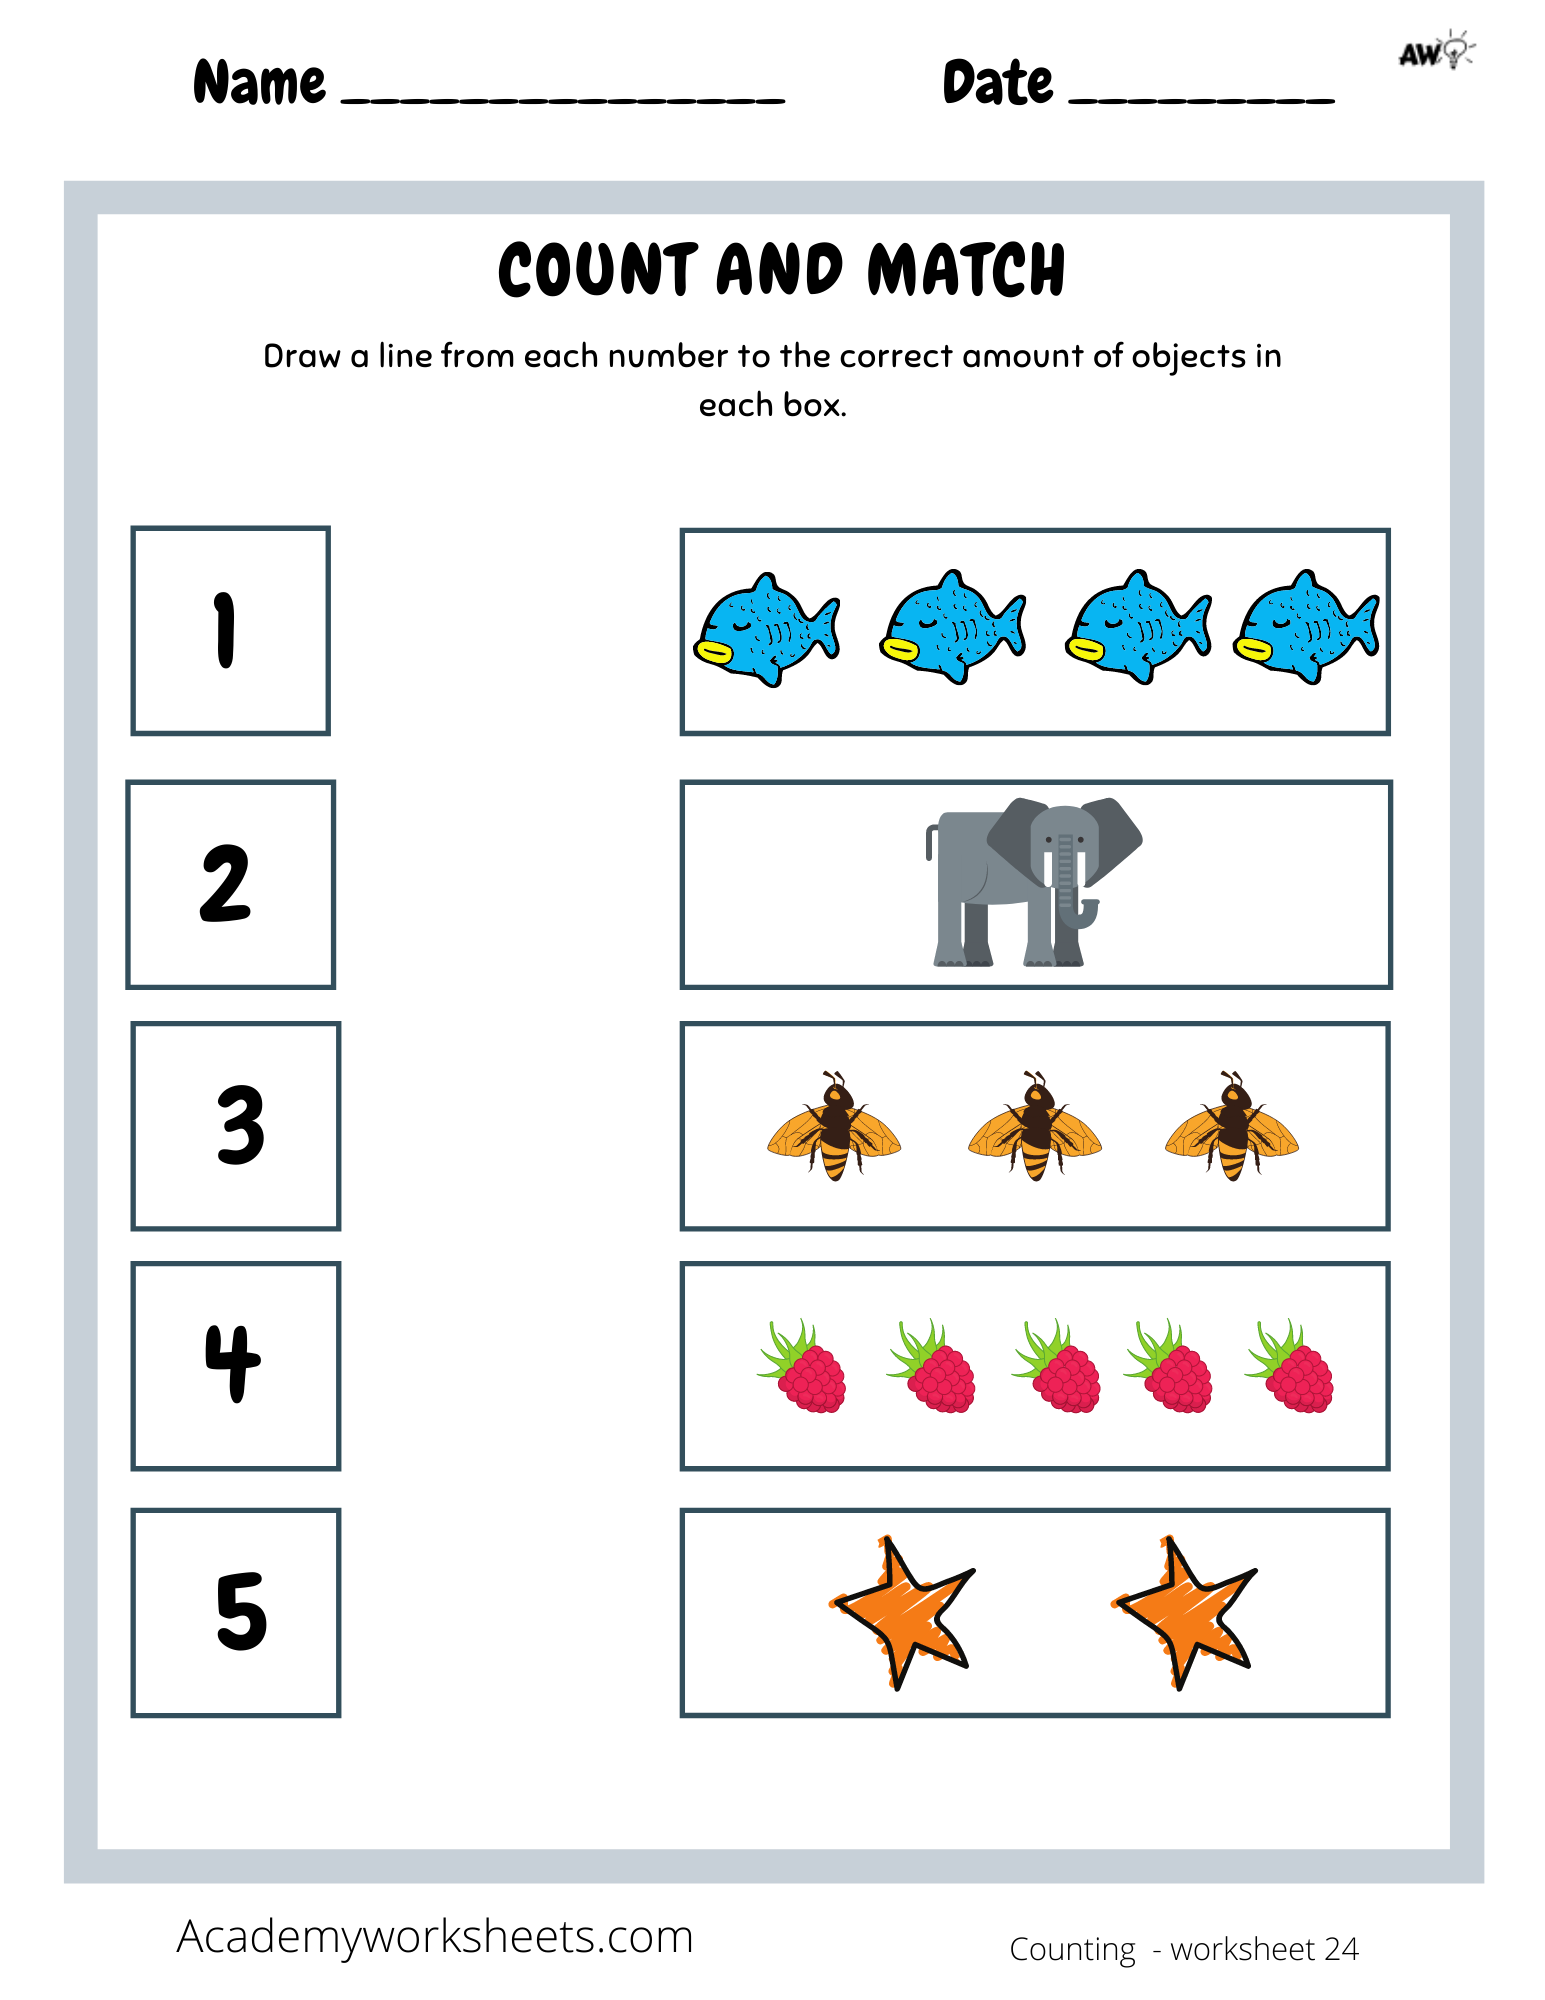 Count and Match Numbers 21-21 Worksheets - Academy Worksheets Intended For Count By 5s Worksheet